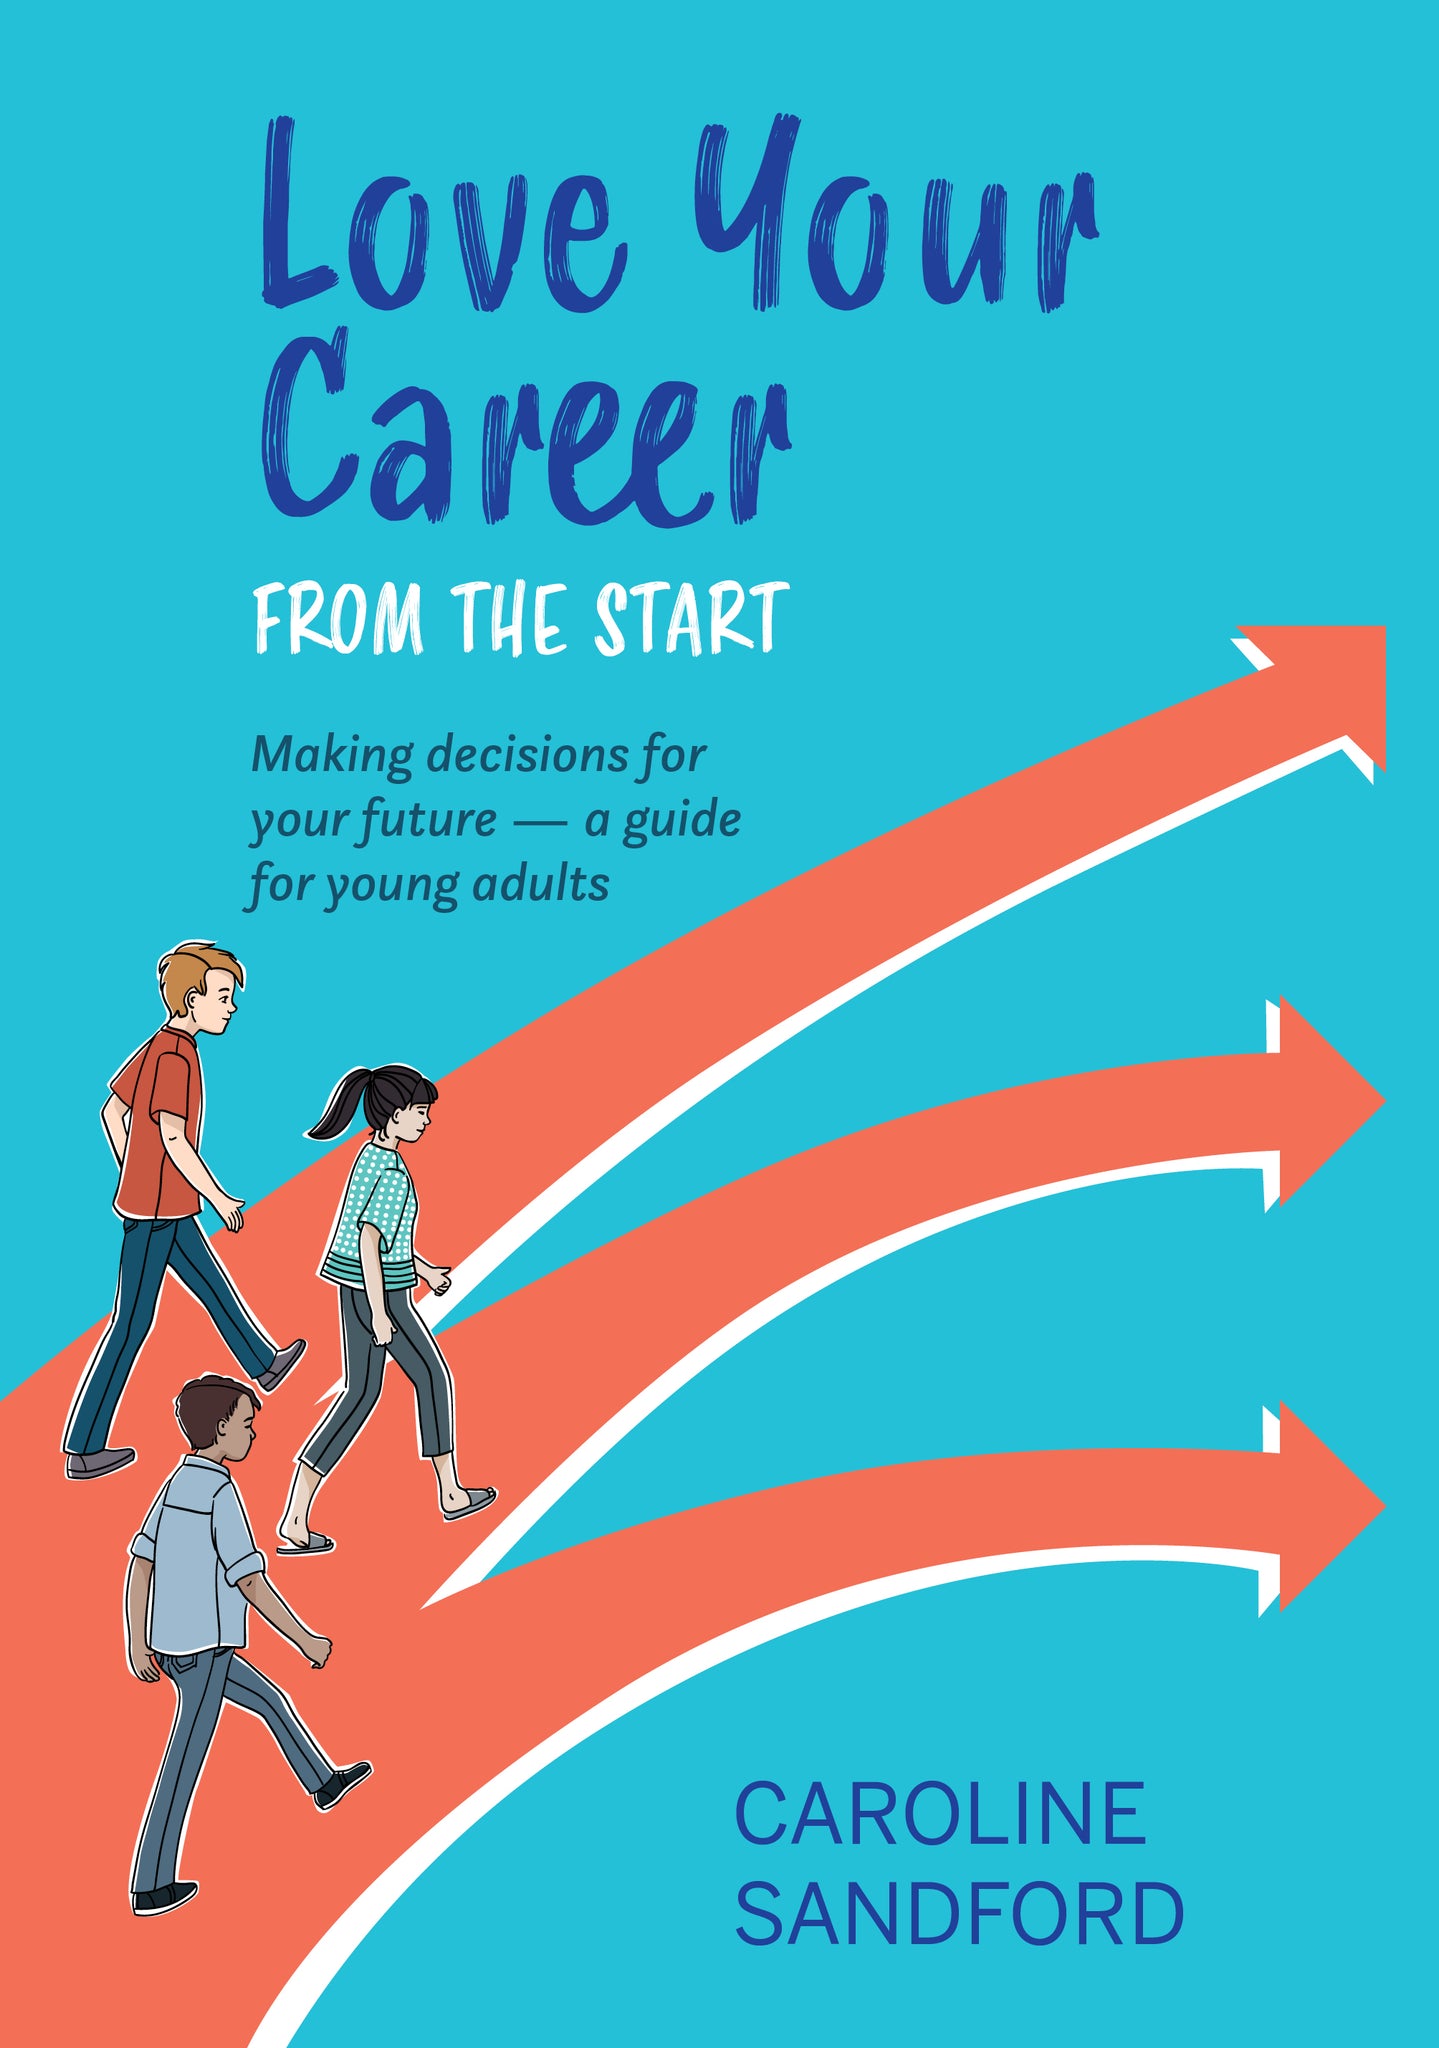 Love Your Career from the Start: Making decisions for your future – a guide for young adults